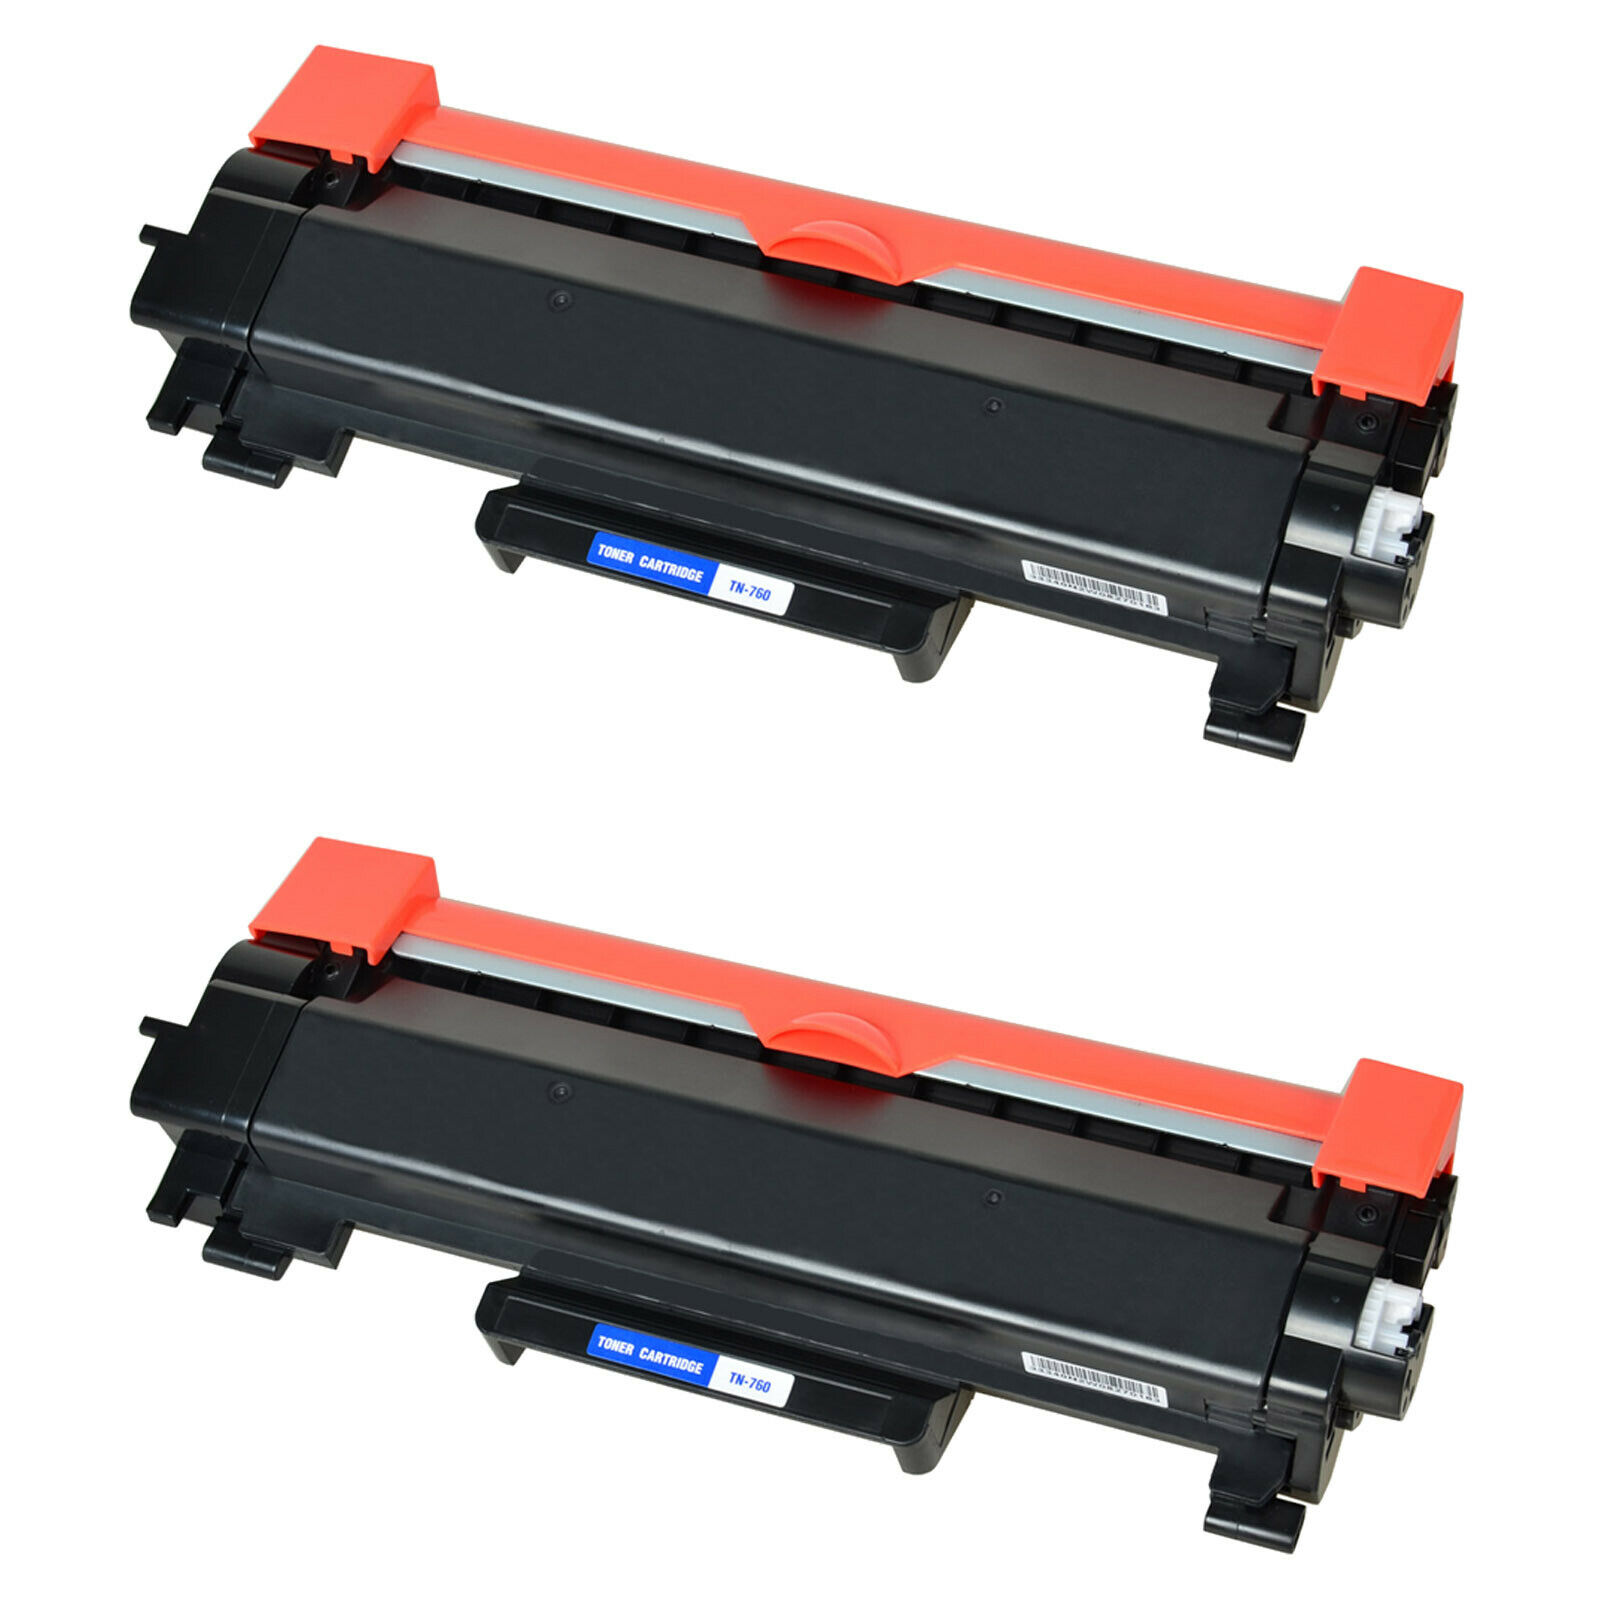 2 Toner Cartridge Compatible Brother TN760 (TN-760) With Chip Black